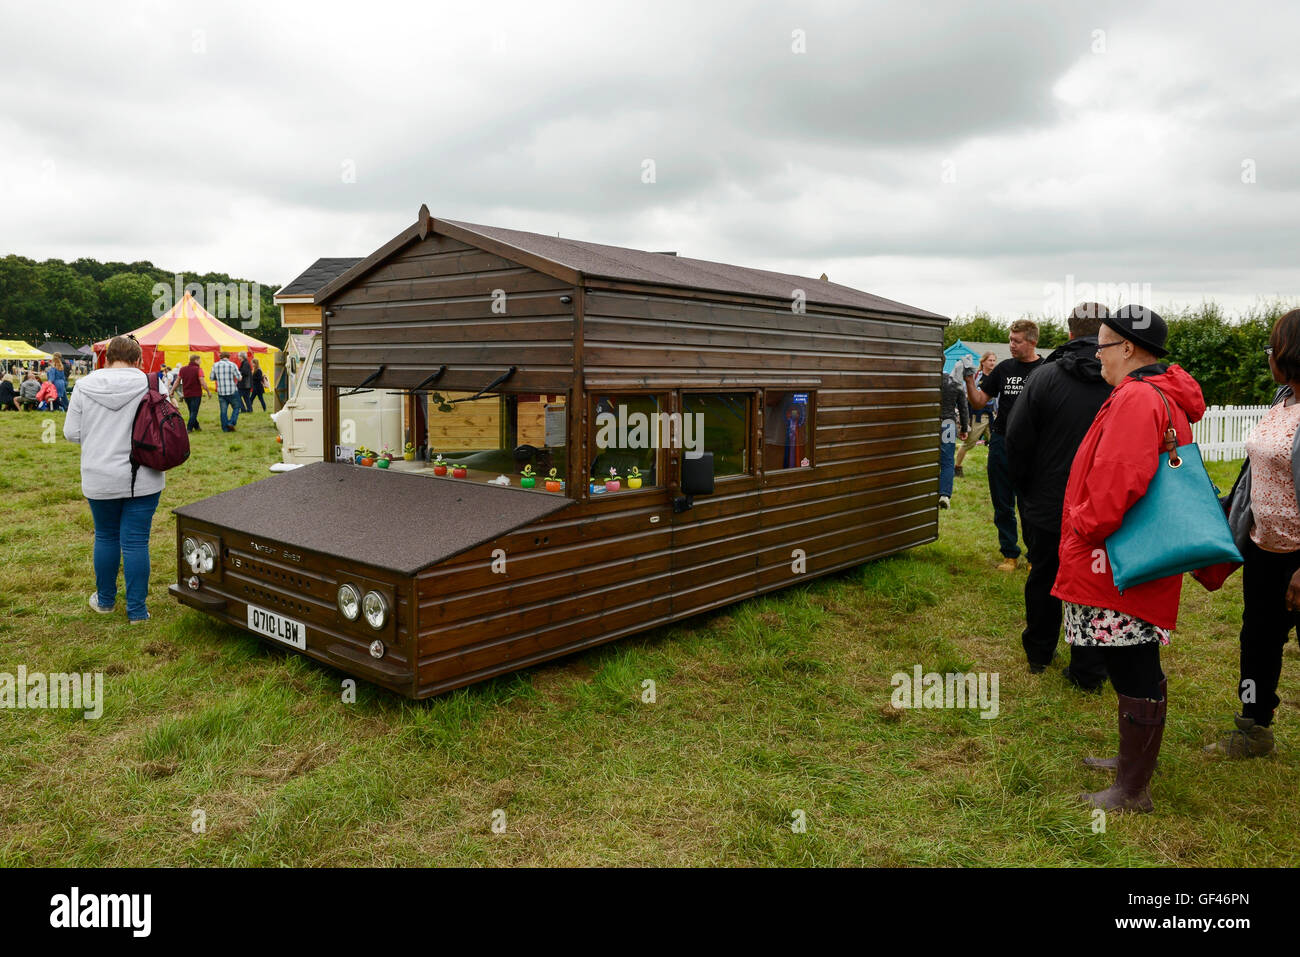 Bolesworth, Cheshire, UK. 29th July 2016. A shed on wheels. The event is the brainchild of Chris Evans and features 3 days of cars, music and entertainment with profits being donated to the charity Children in Need. Credit:  Andrew Paterson/Alamy Live News Stock Photo